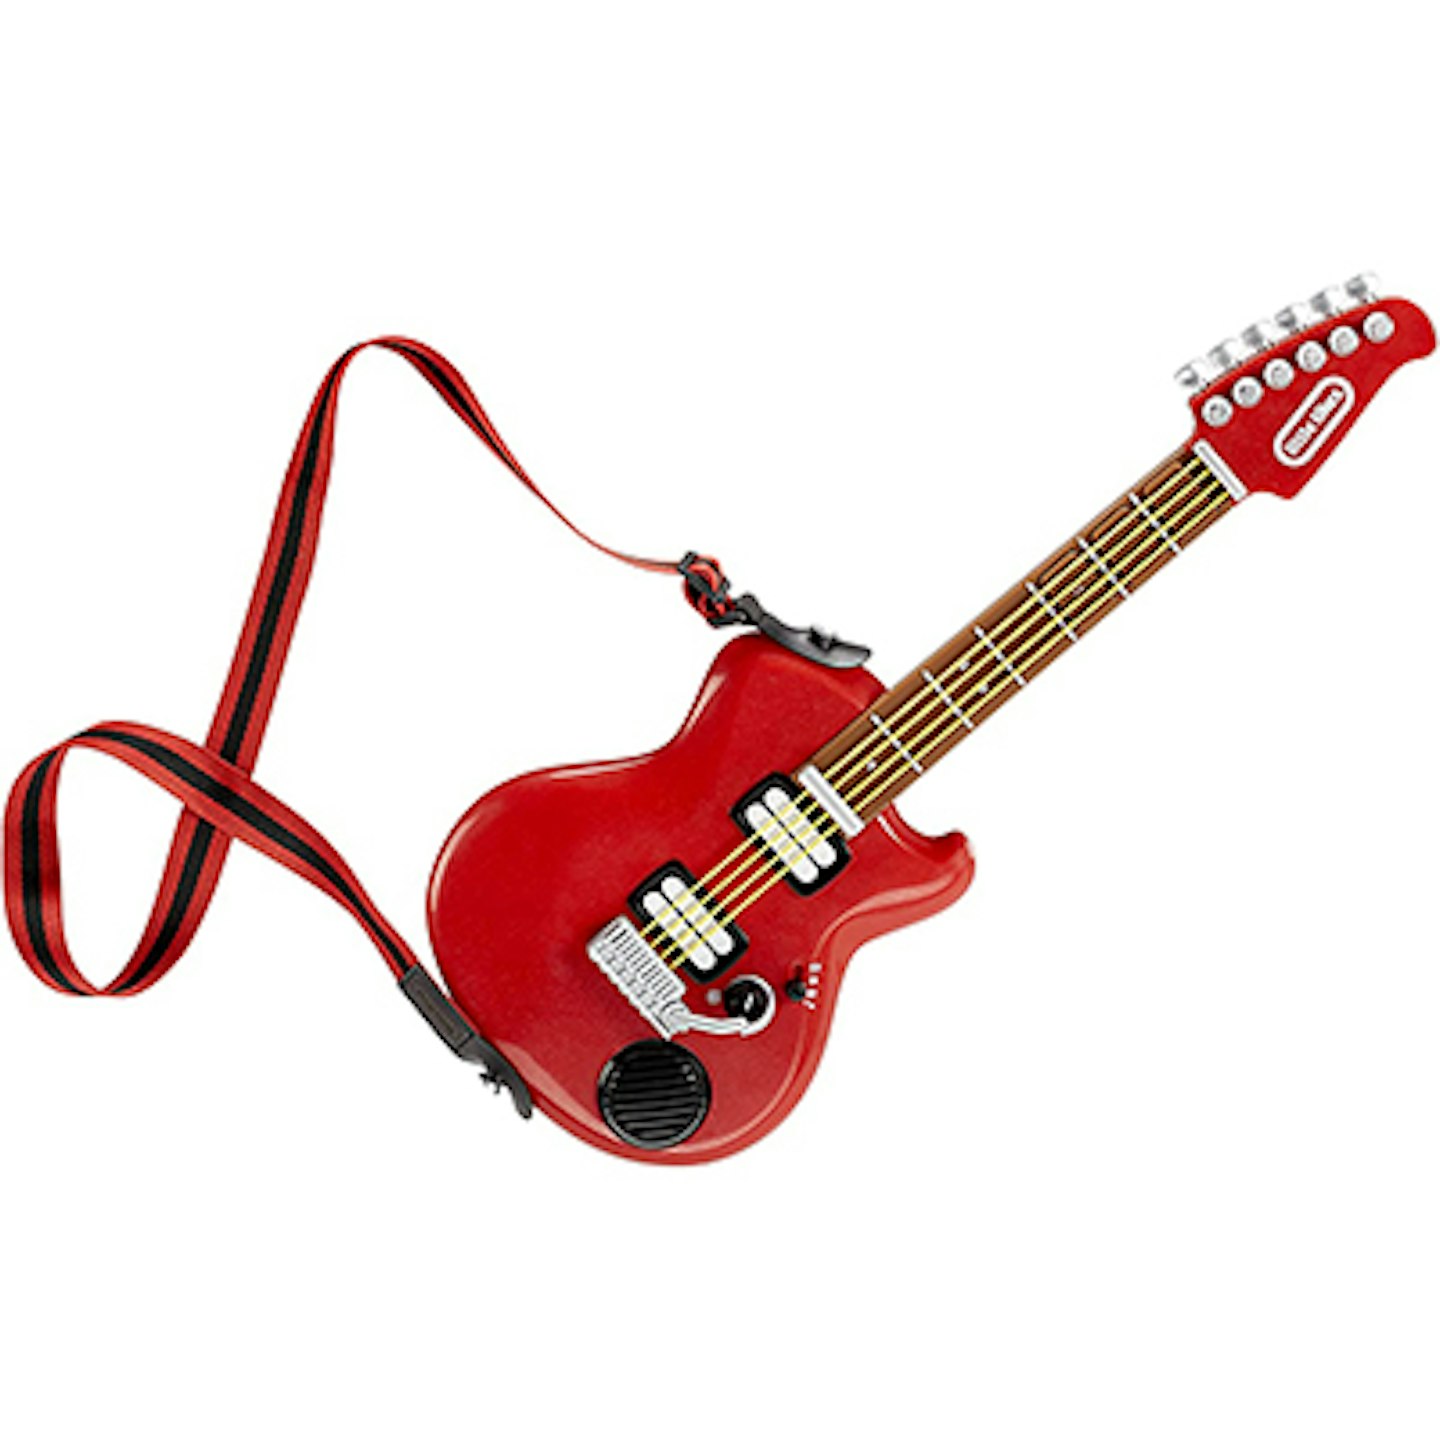 Little Tikes electric guitar